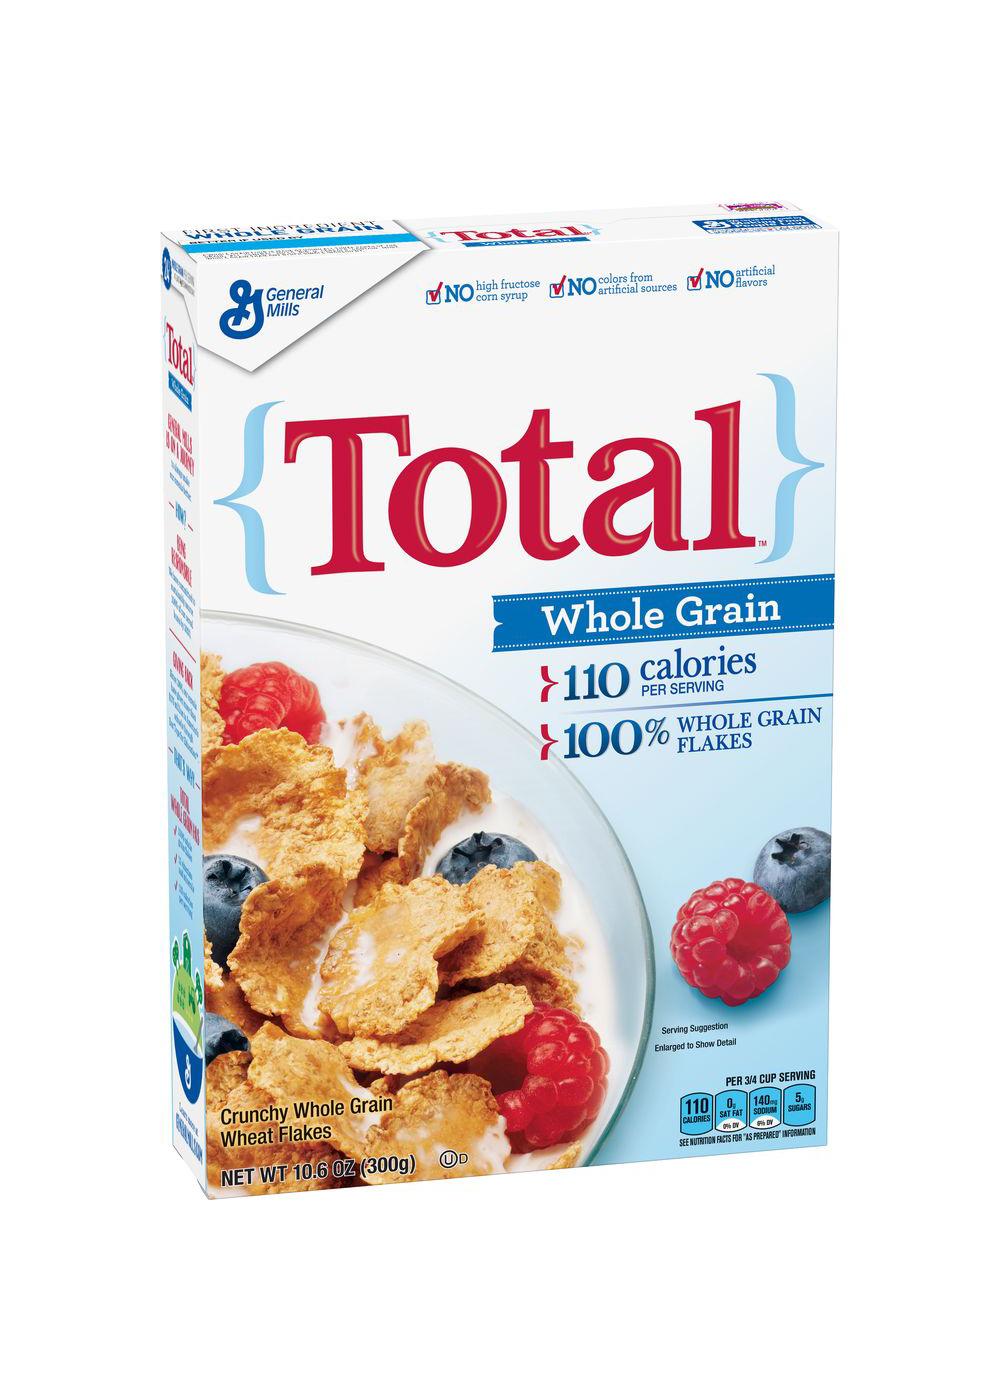 General Mills Total Whole Grain Cereal; image 1 of 2